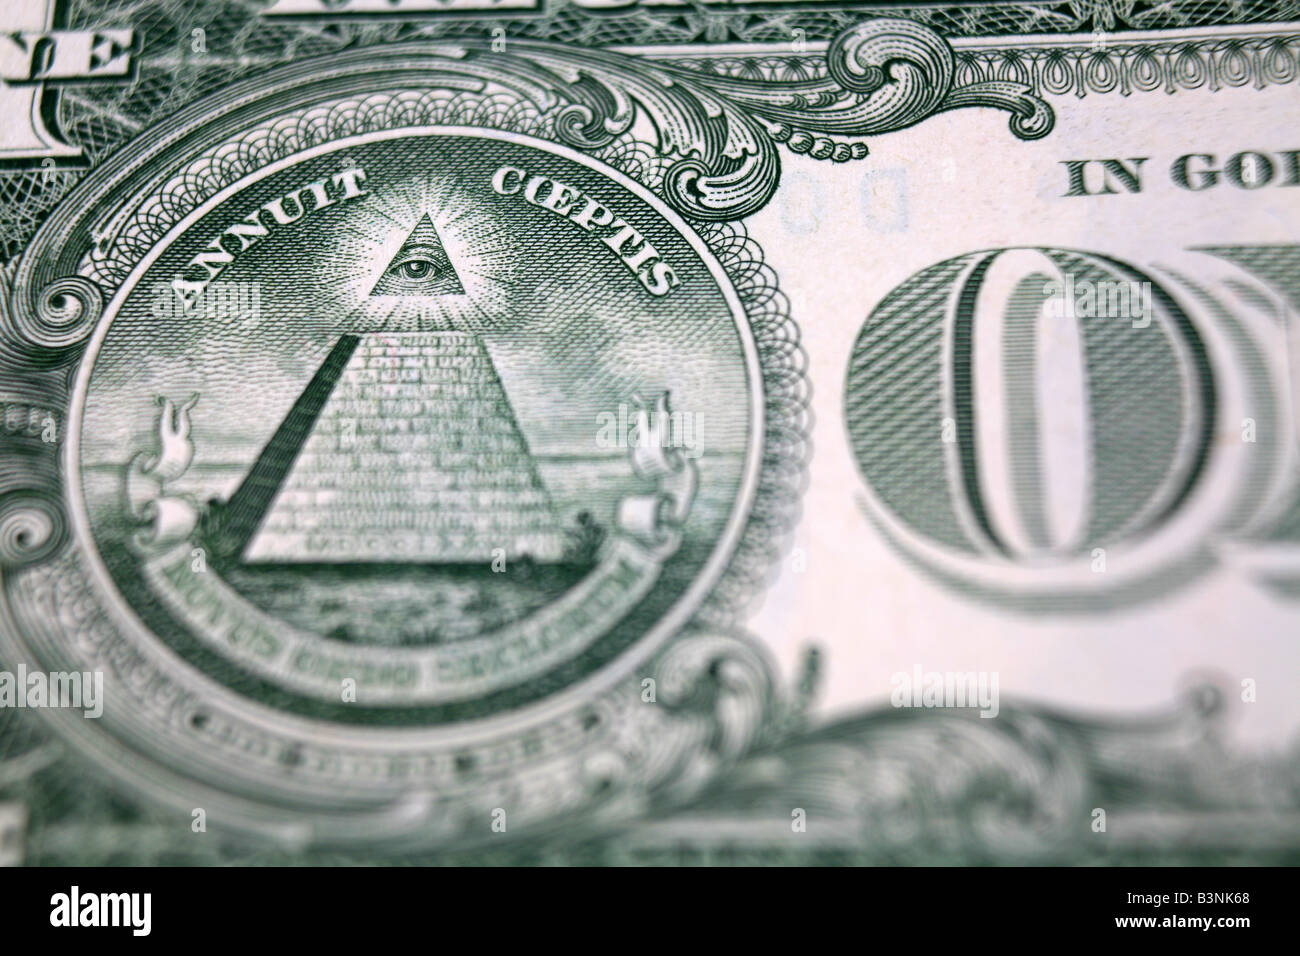 Triangle Symbol Pyramid Green Back Bank note Dollars from United States of America Stock Photo